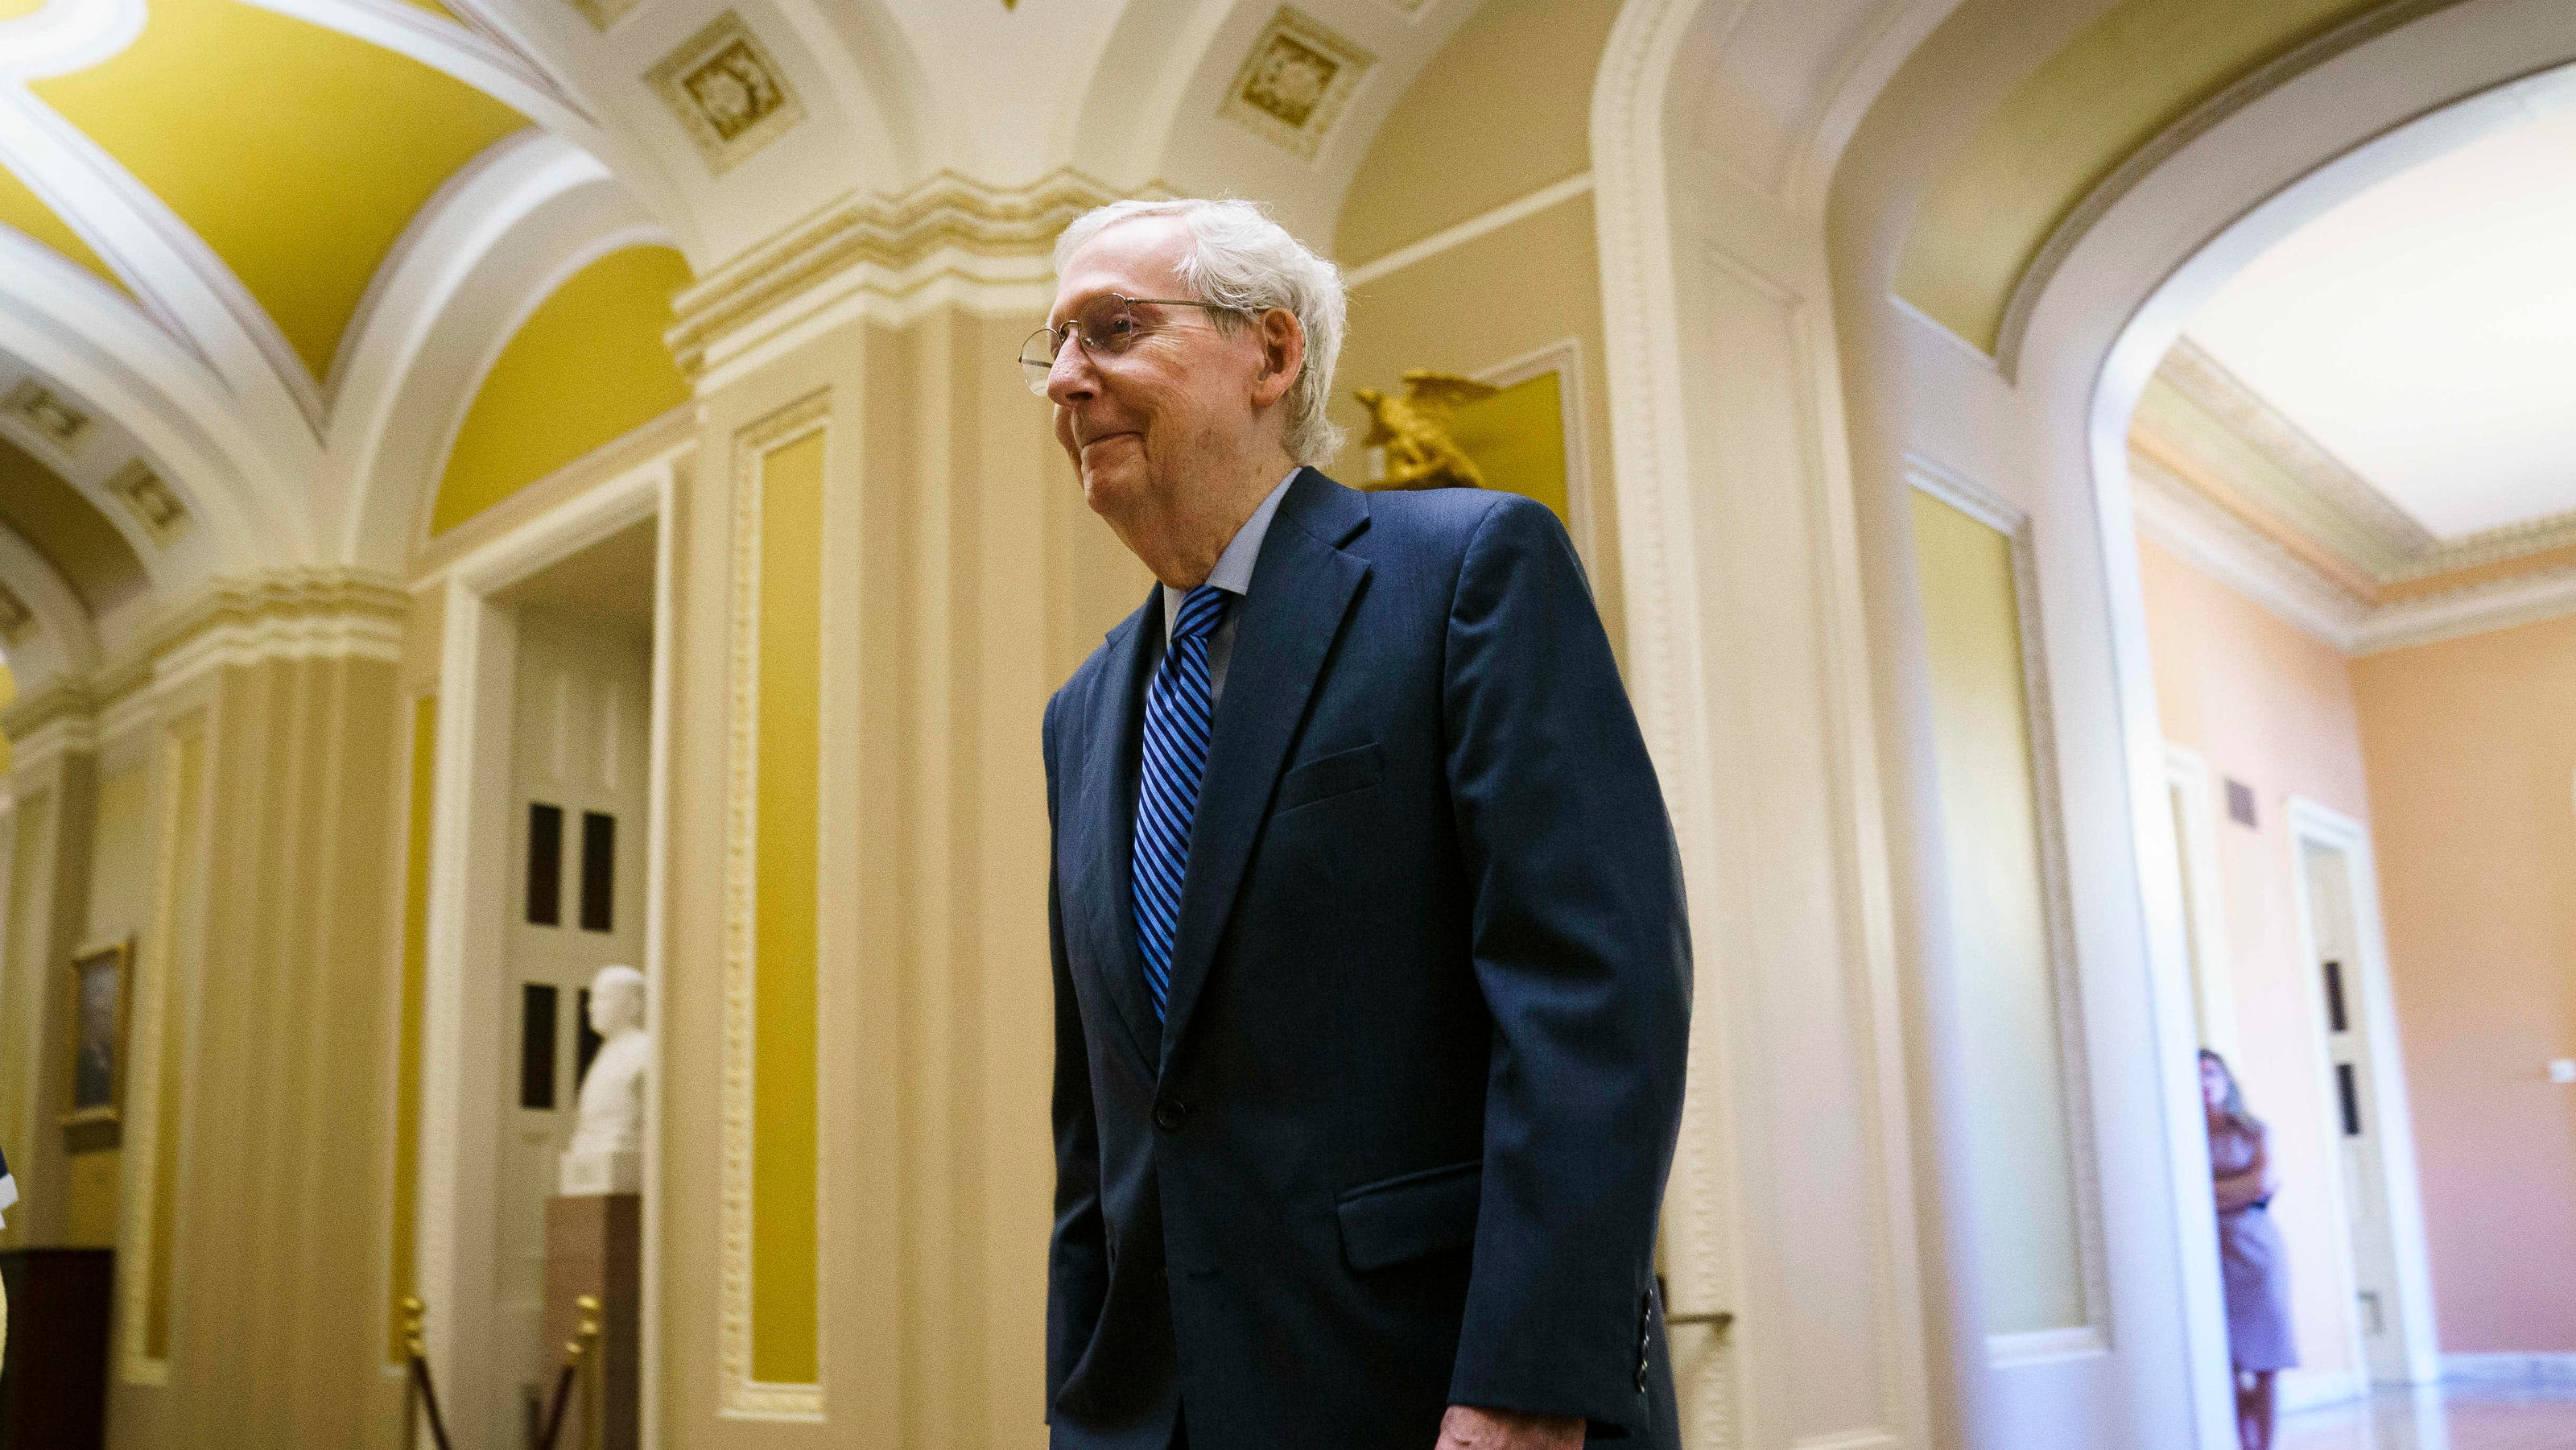 After long battle over Ukraine aid, Mitch McConnell says largest foes were outside Congress